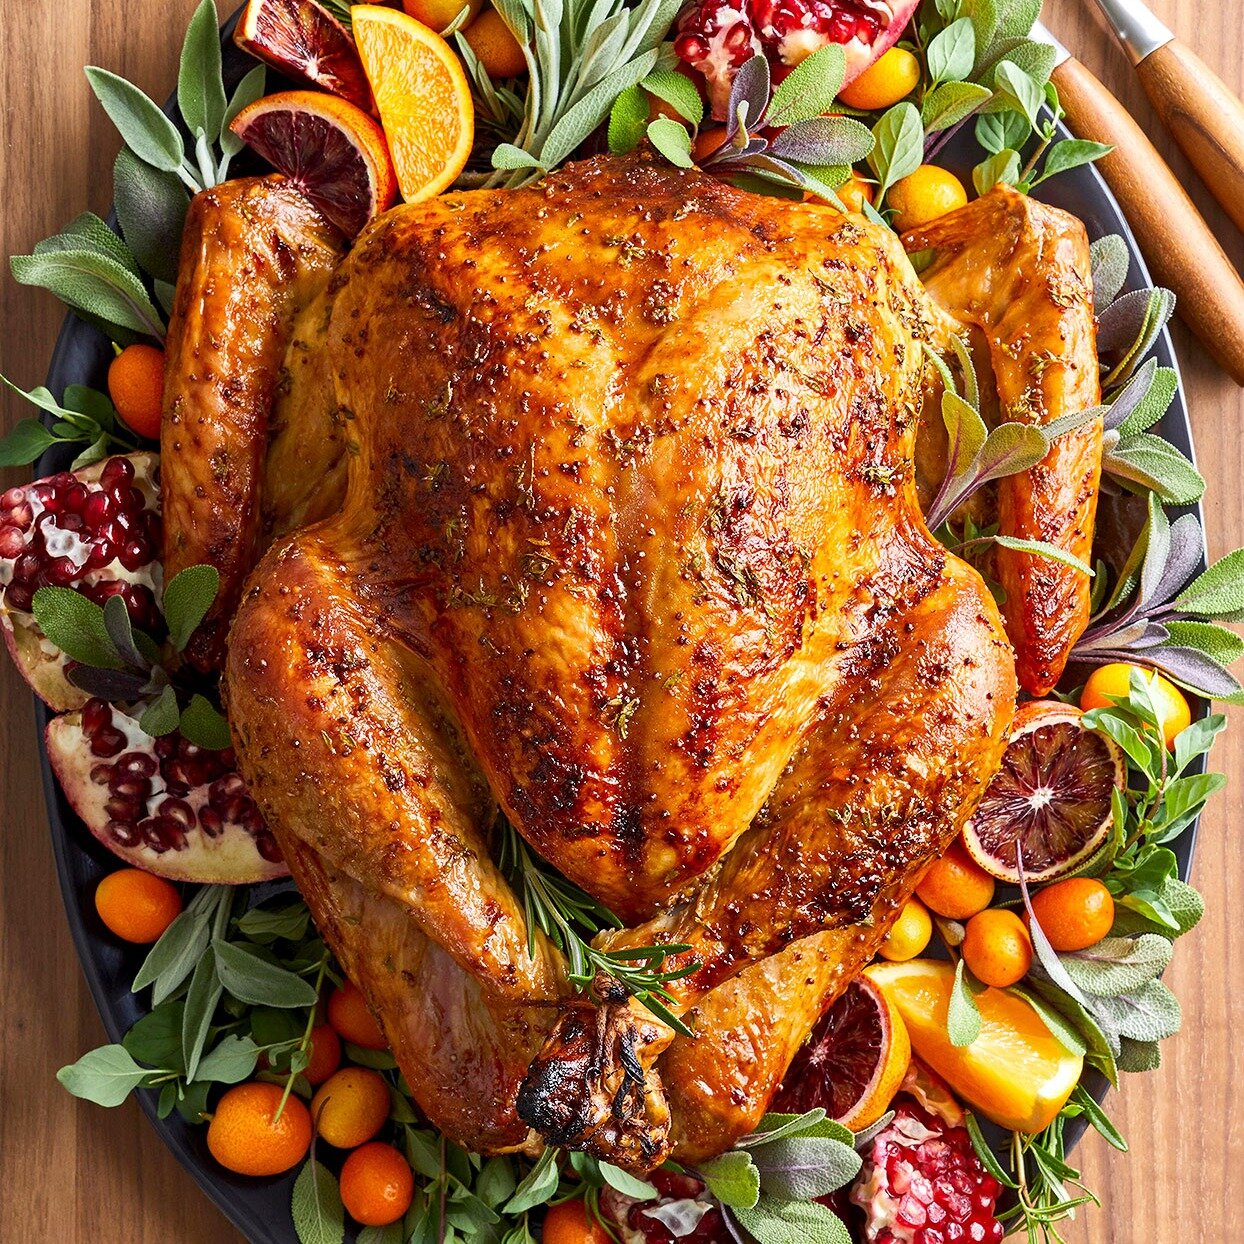 Only 33 days until Thanksgiving! Make this one a holiday to remember with a FRESH, local, free-range Turkey from Glick Poultry. Reserve your bird today, and pickup the Tuesday or Wednesday before Thanksgiving, November 21-22, 2023. Link in bio.